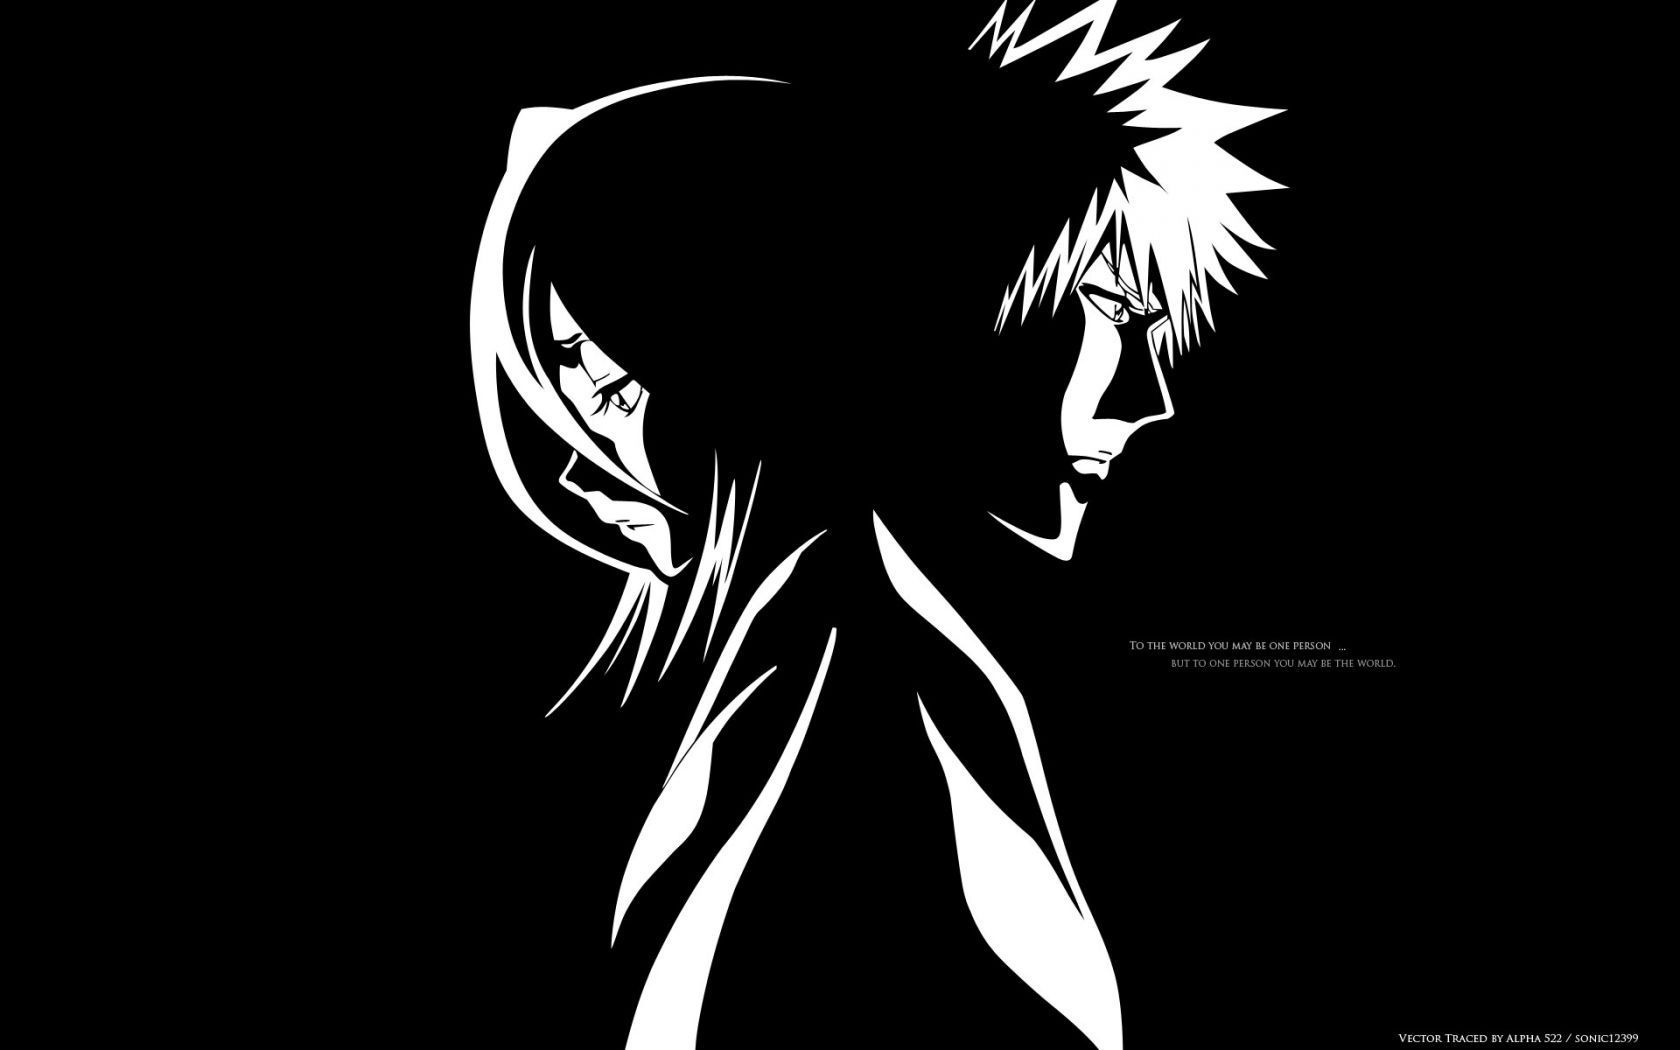 Bleach Wallpapers Archives - Page 4 of 5 - Wallpaper